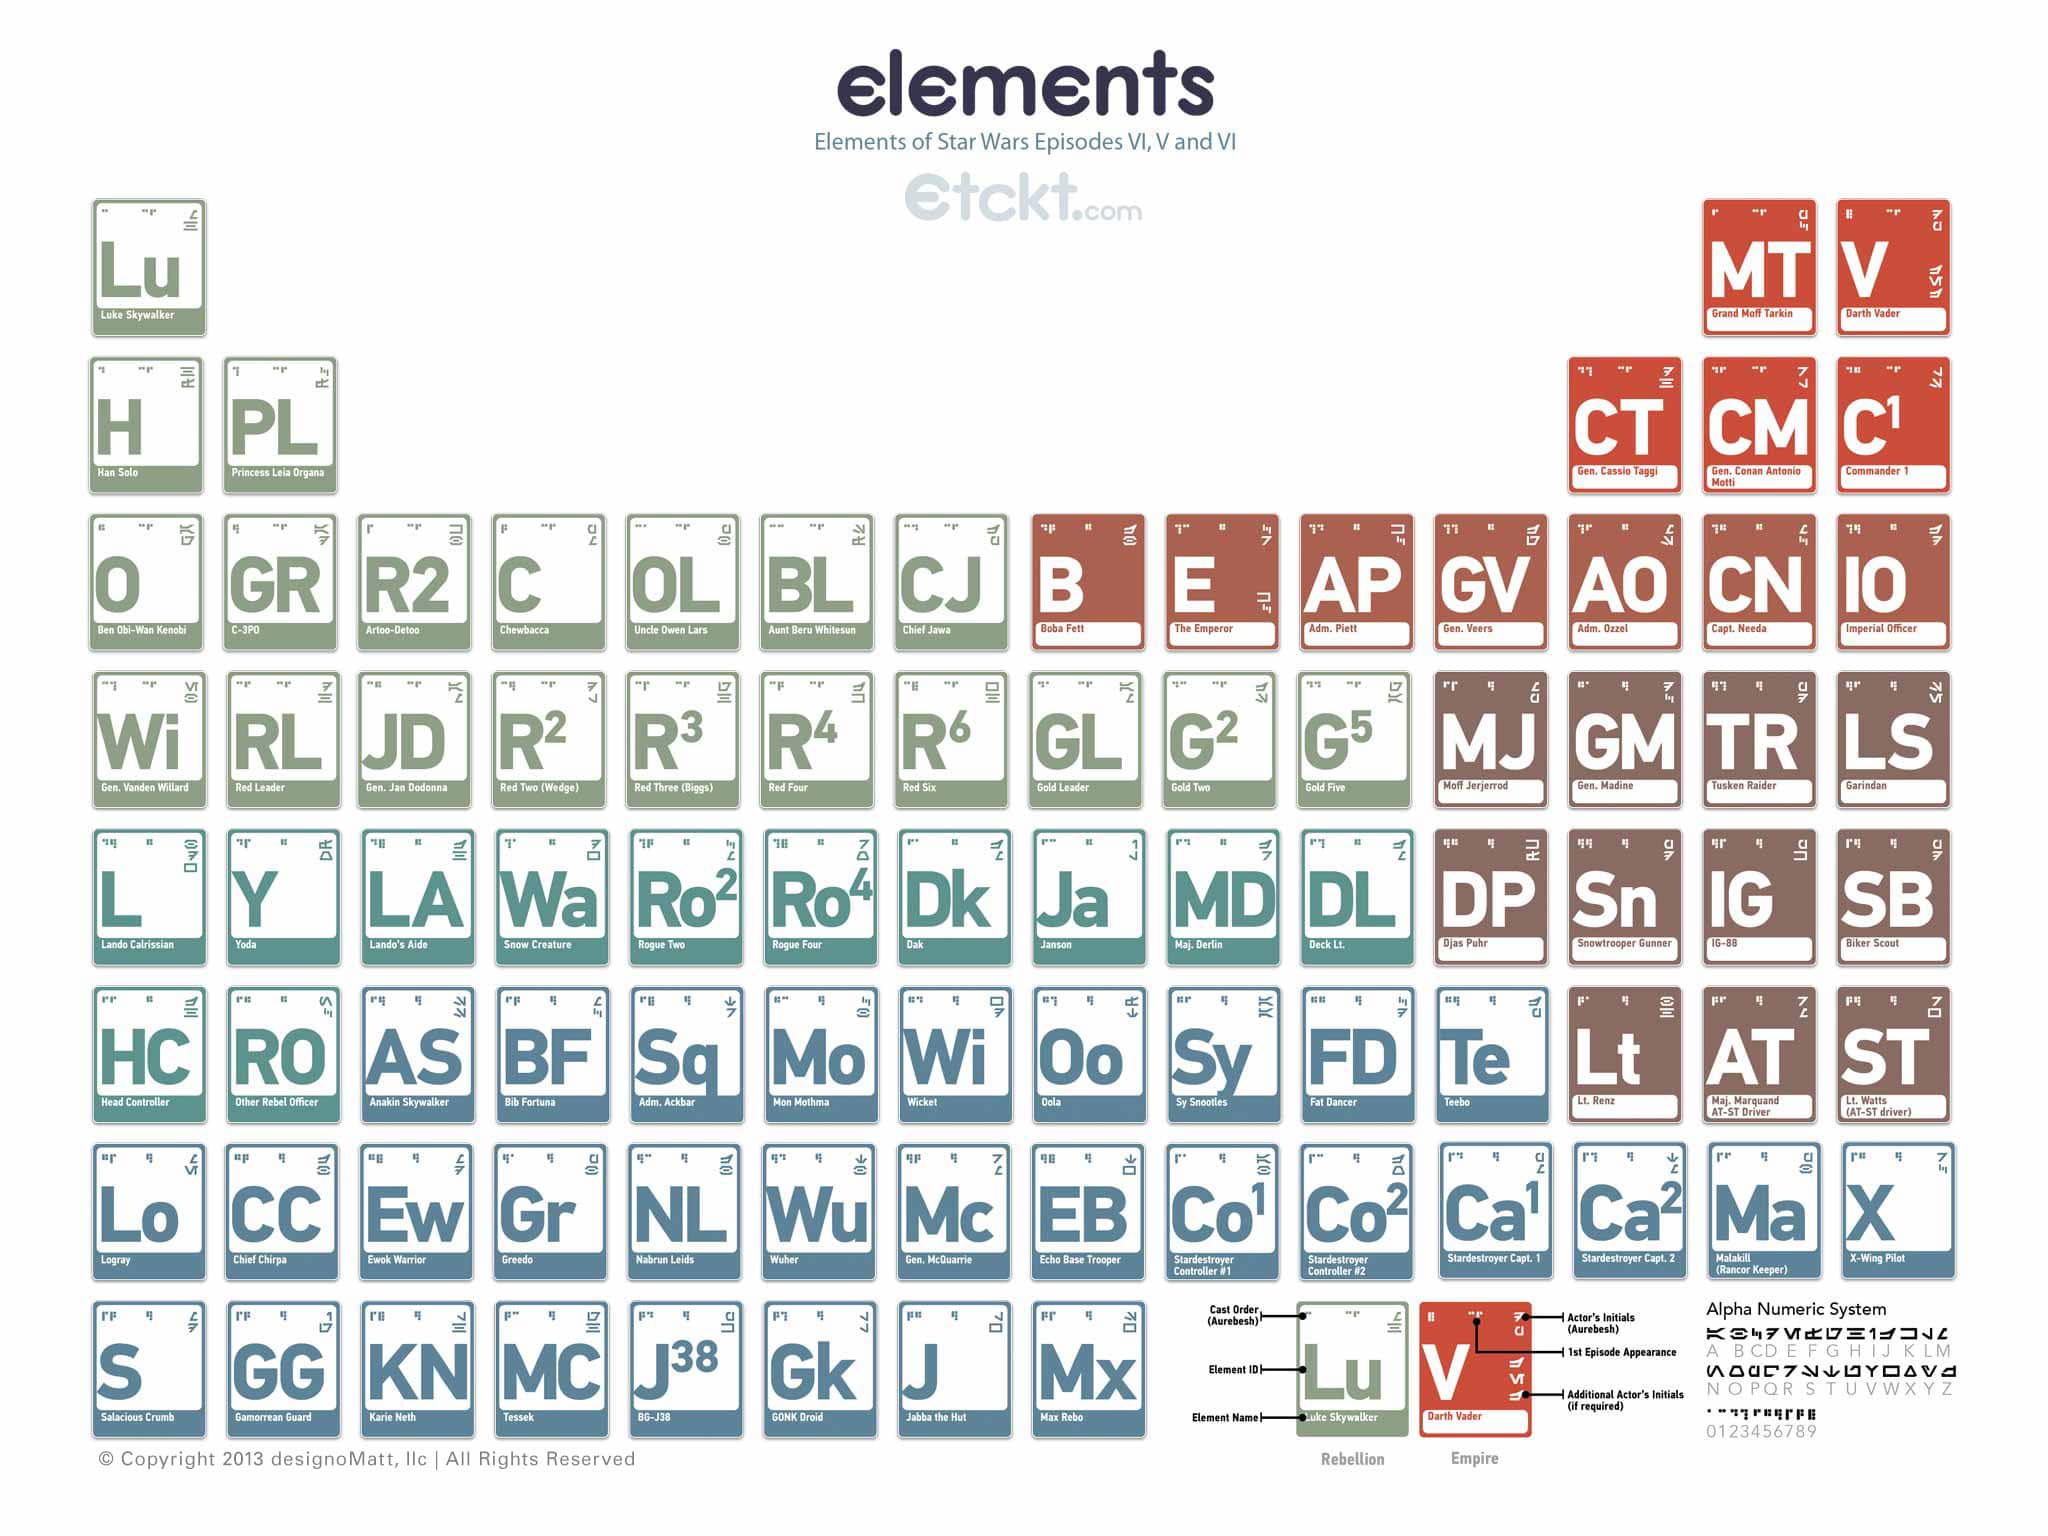 Complex Periodic Table Of Elements From Star Wars Episodes IV, V, VI